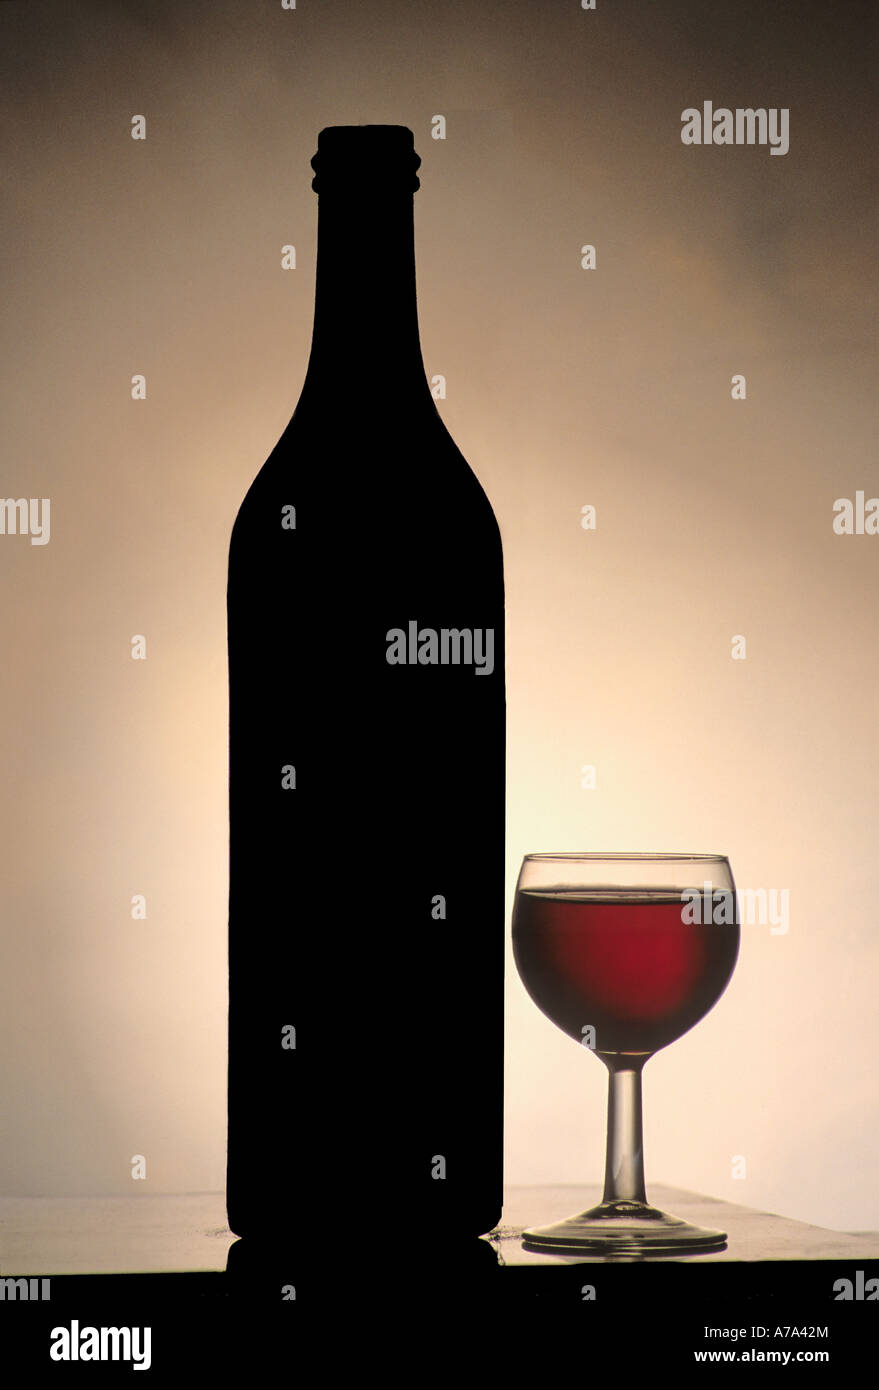 Red wine bottle and wine glass, silhouette Stock Photo